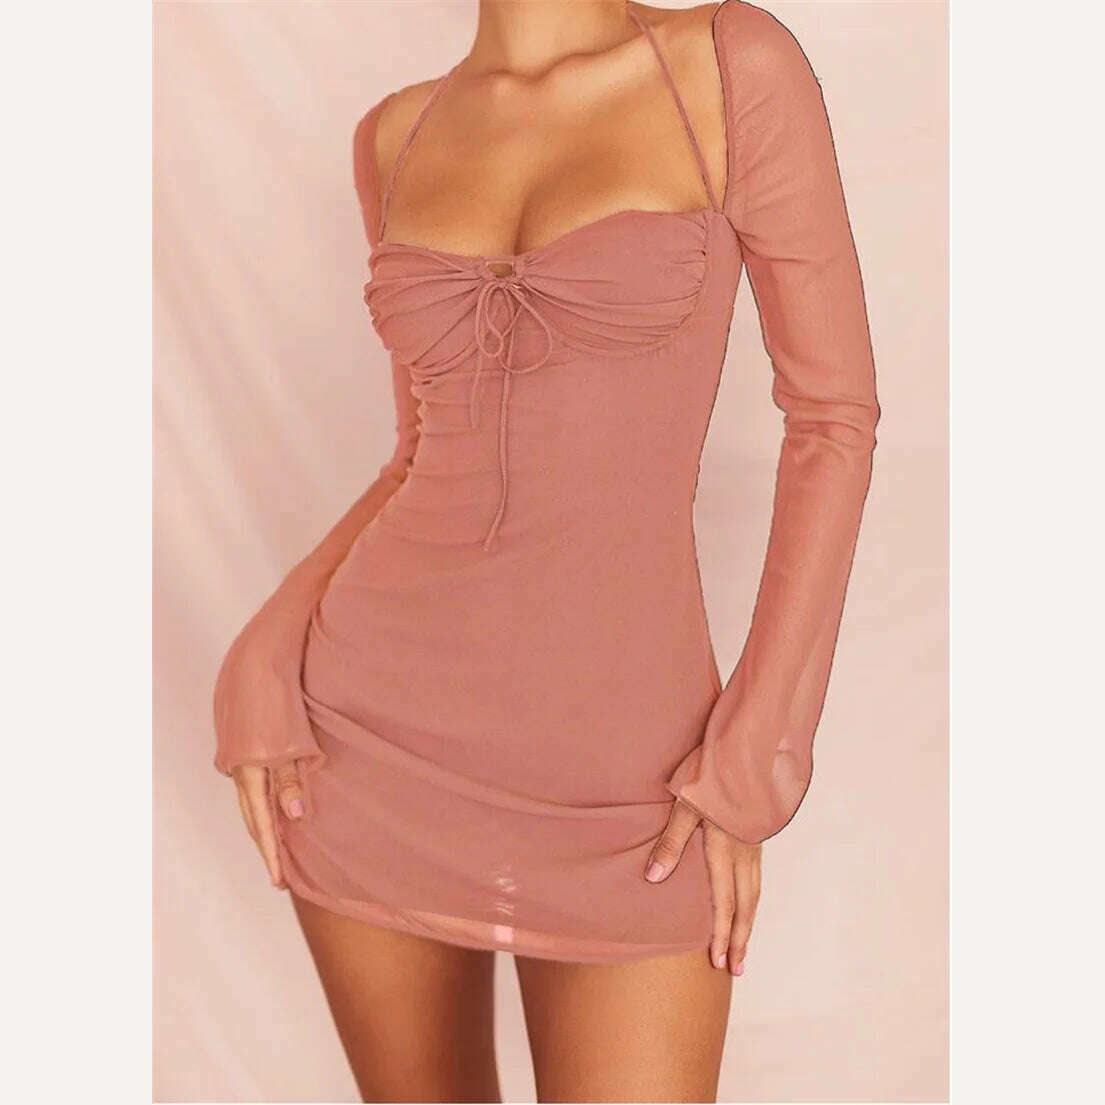 KIMLUD, Hot Sale Women's Halter Bodycon Mini Dress, Long Sleeve Ruched Bust Solid Color Sexy Club Dress, Blak/Brown/Pink/White, S/M/L, KIMLUD Womens Clothes